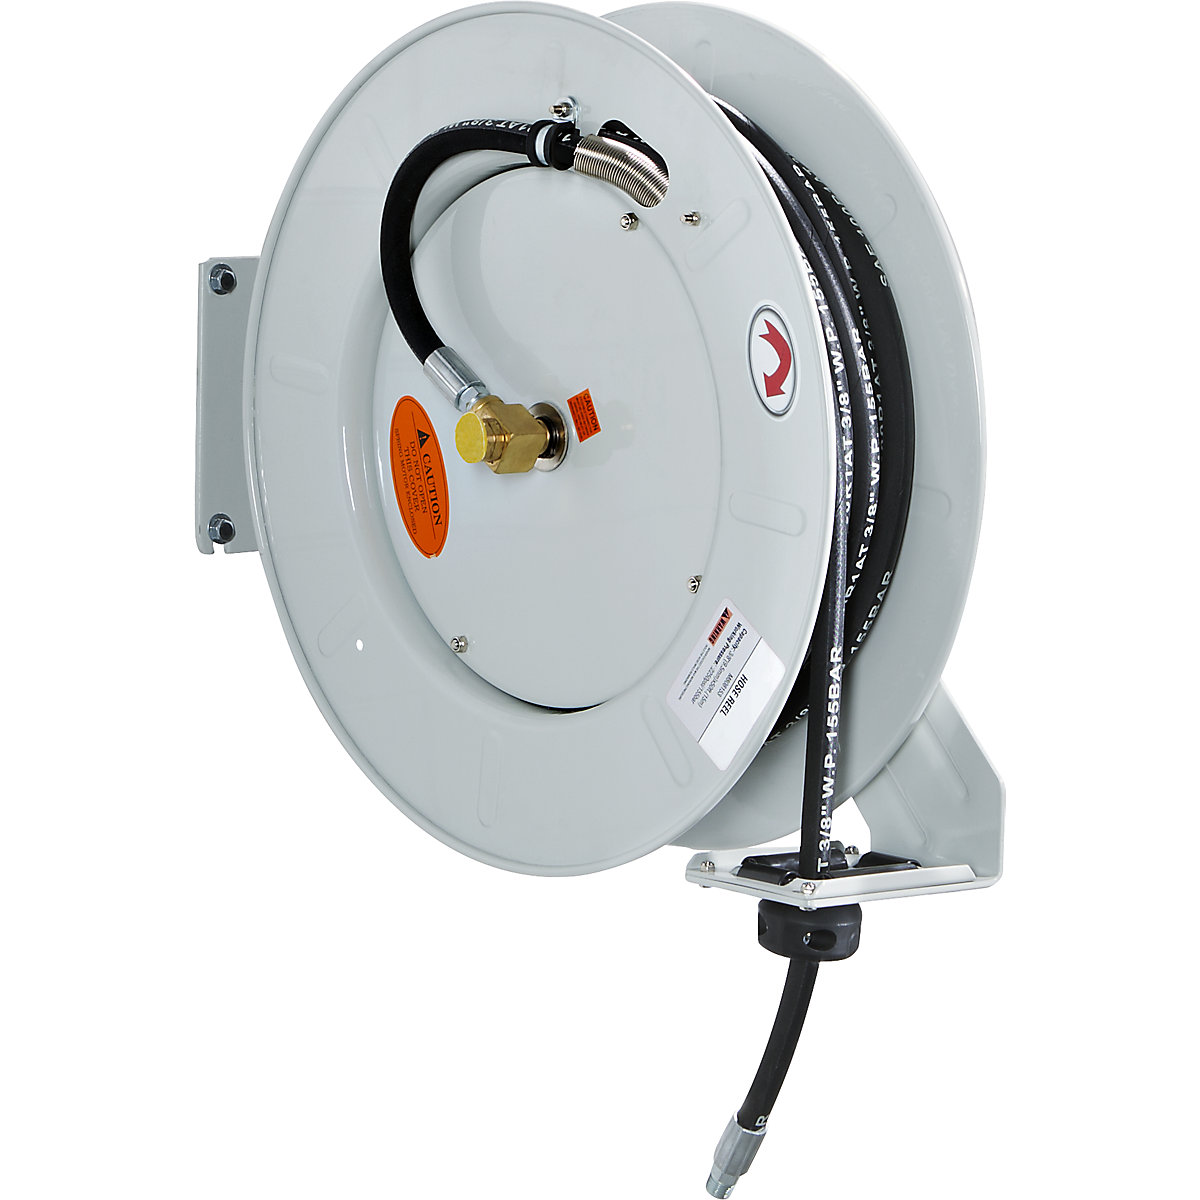 Hose reel – eurokraft pro: for compressed air and water